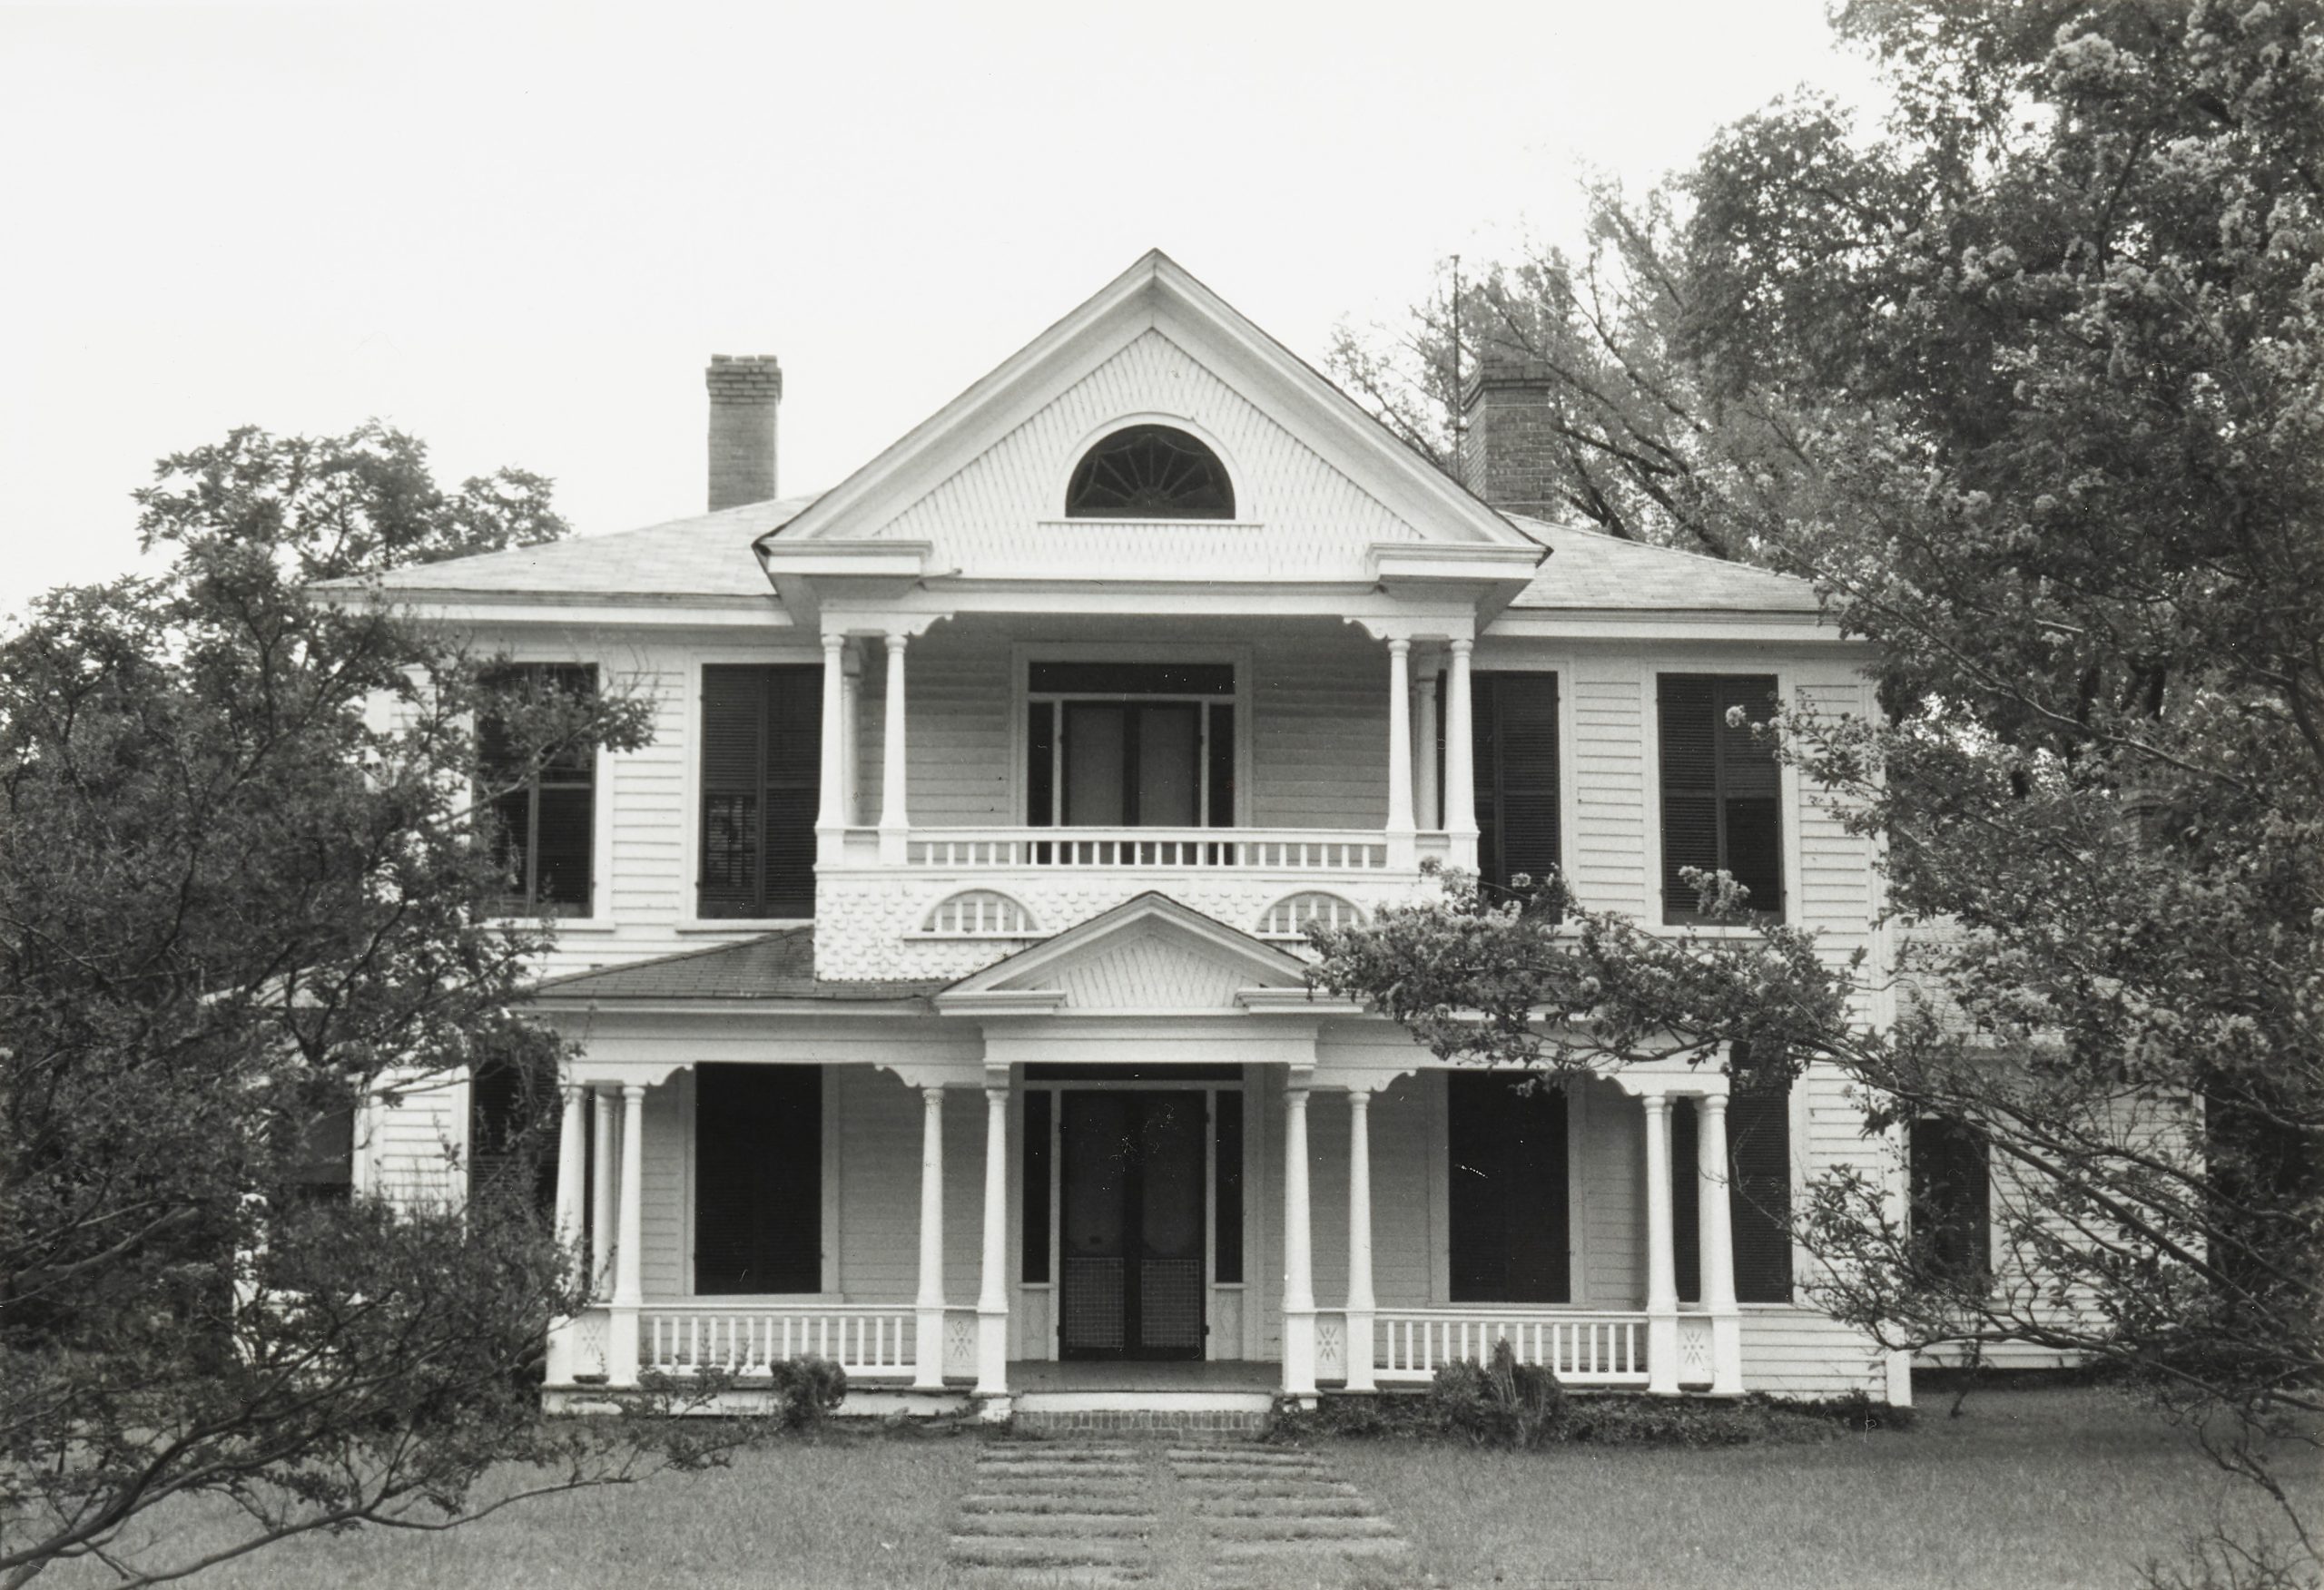 Image of the front of a 19th century two-story home. There is a 2nd floor balcony and a covered front porch.